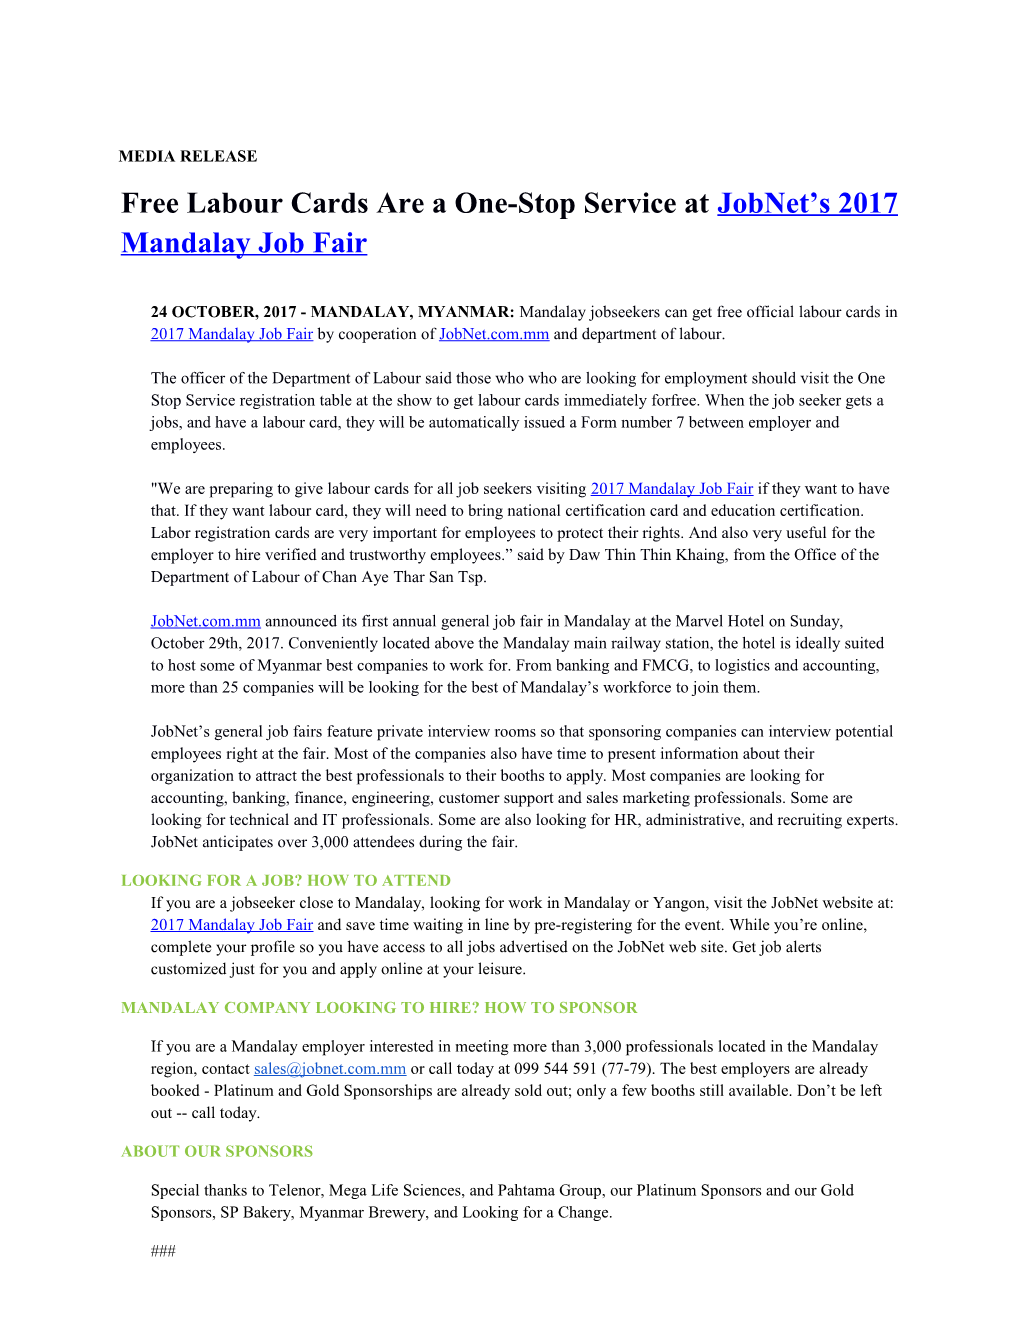 Free Labour Cards Are a One-Stop Service at Jobnet S 2017 Mandalay Job Fair